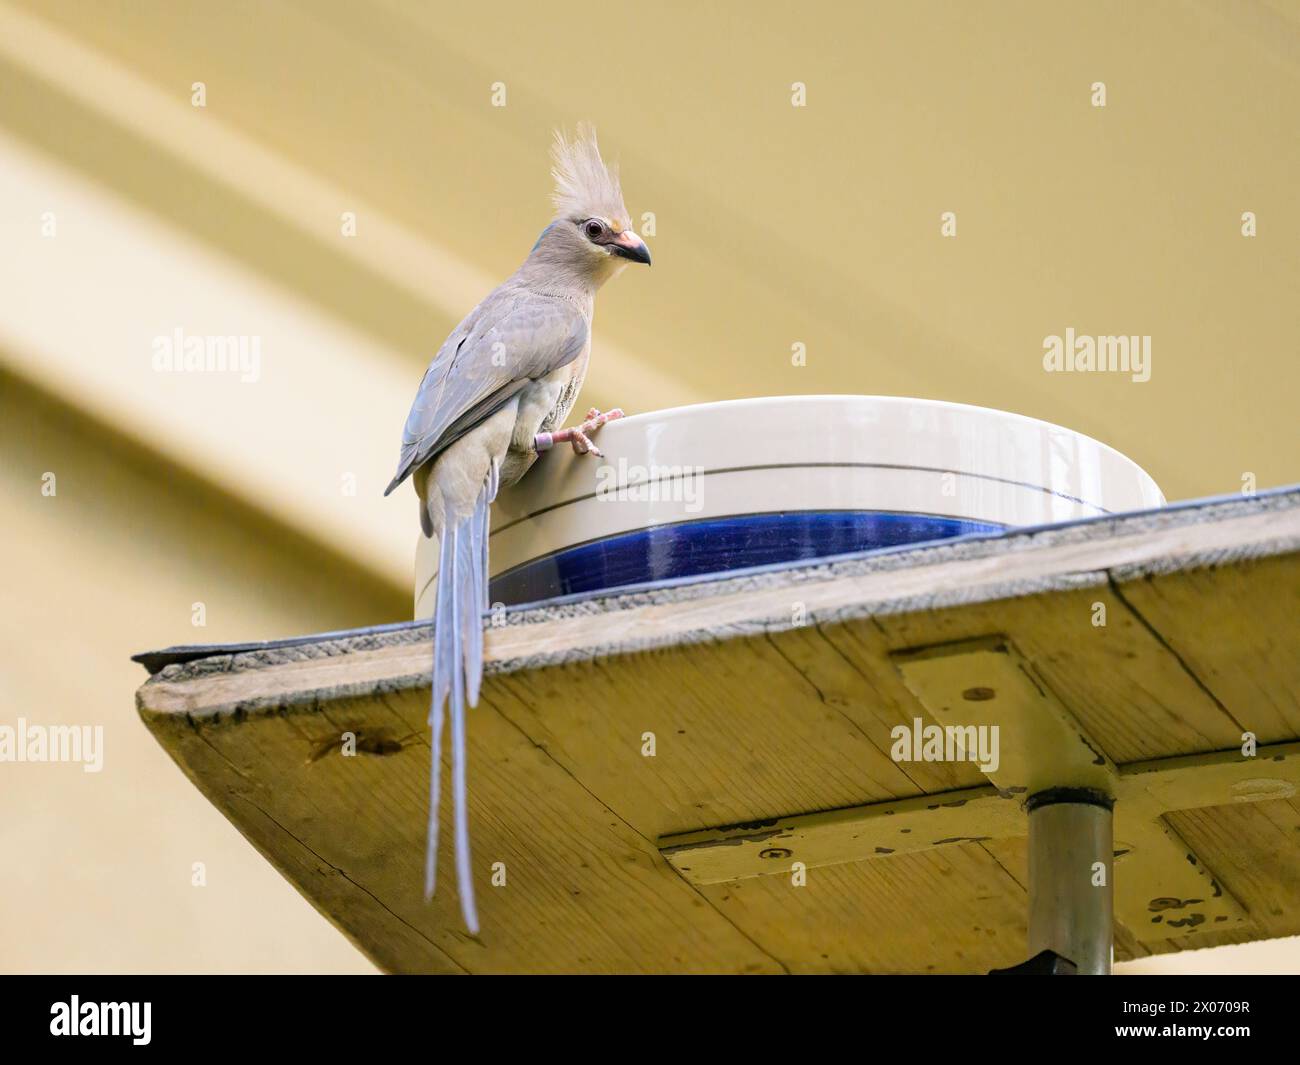 A blue naped Mousebird sitting on a bowl in a zoo Austria Stock Photo